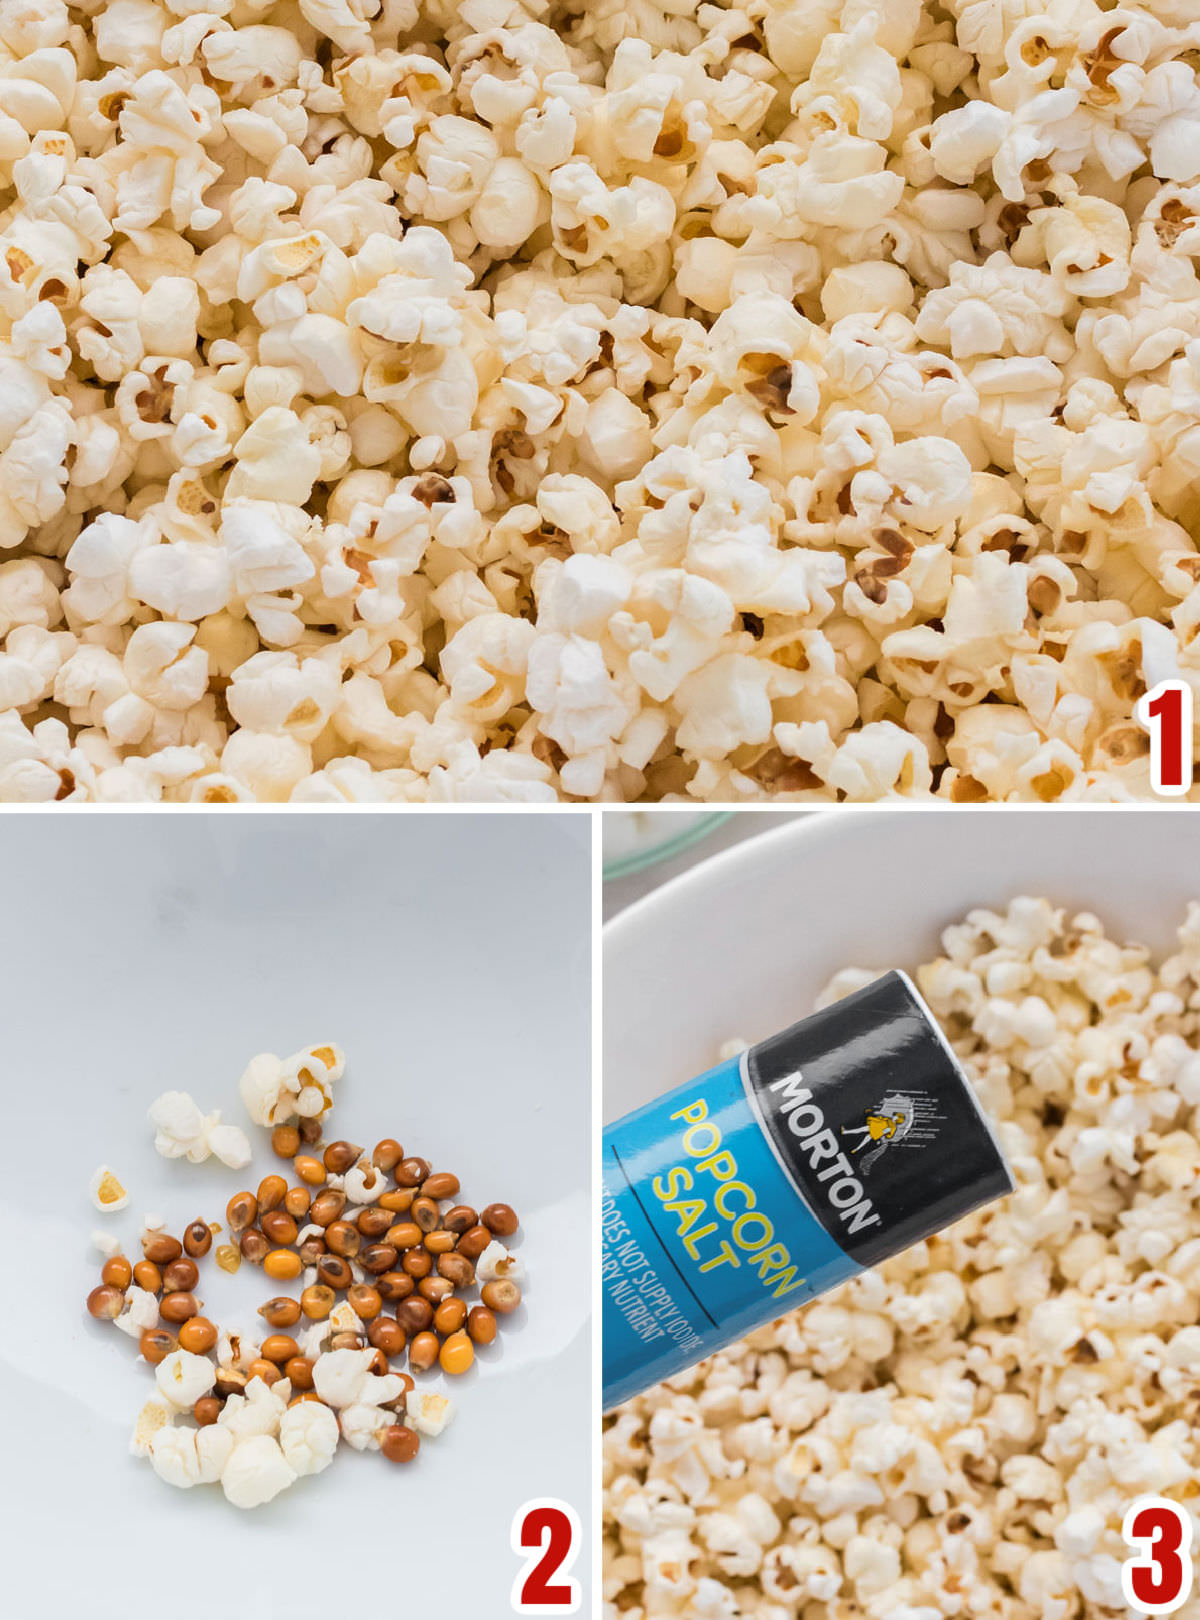 Collage image showing the steps for making homemade popcorn for the Easy Caramel Popcorn.